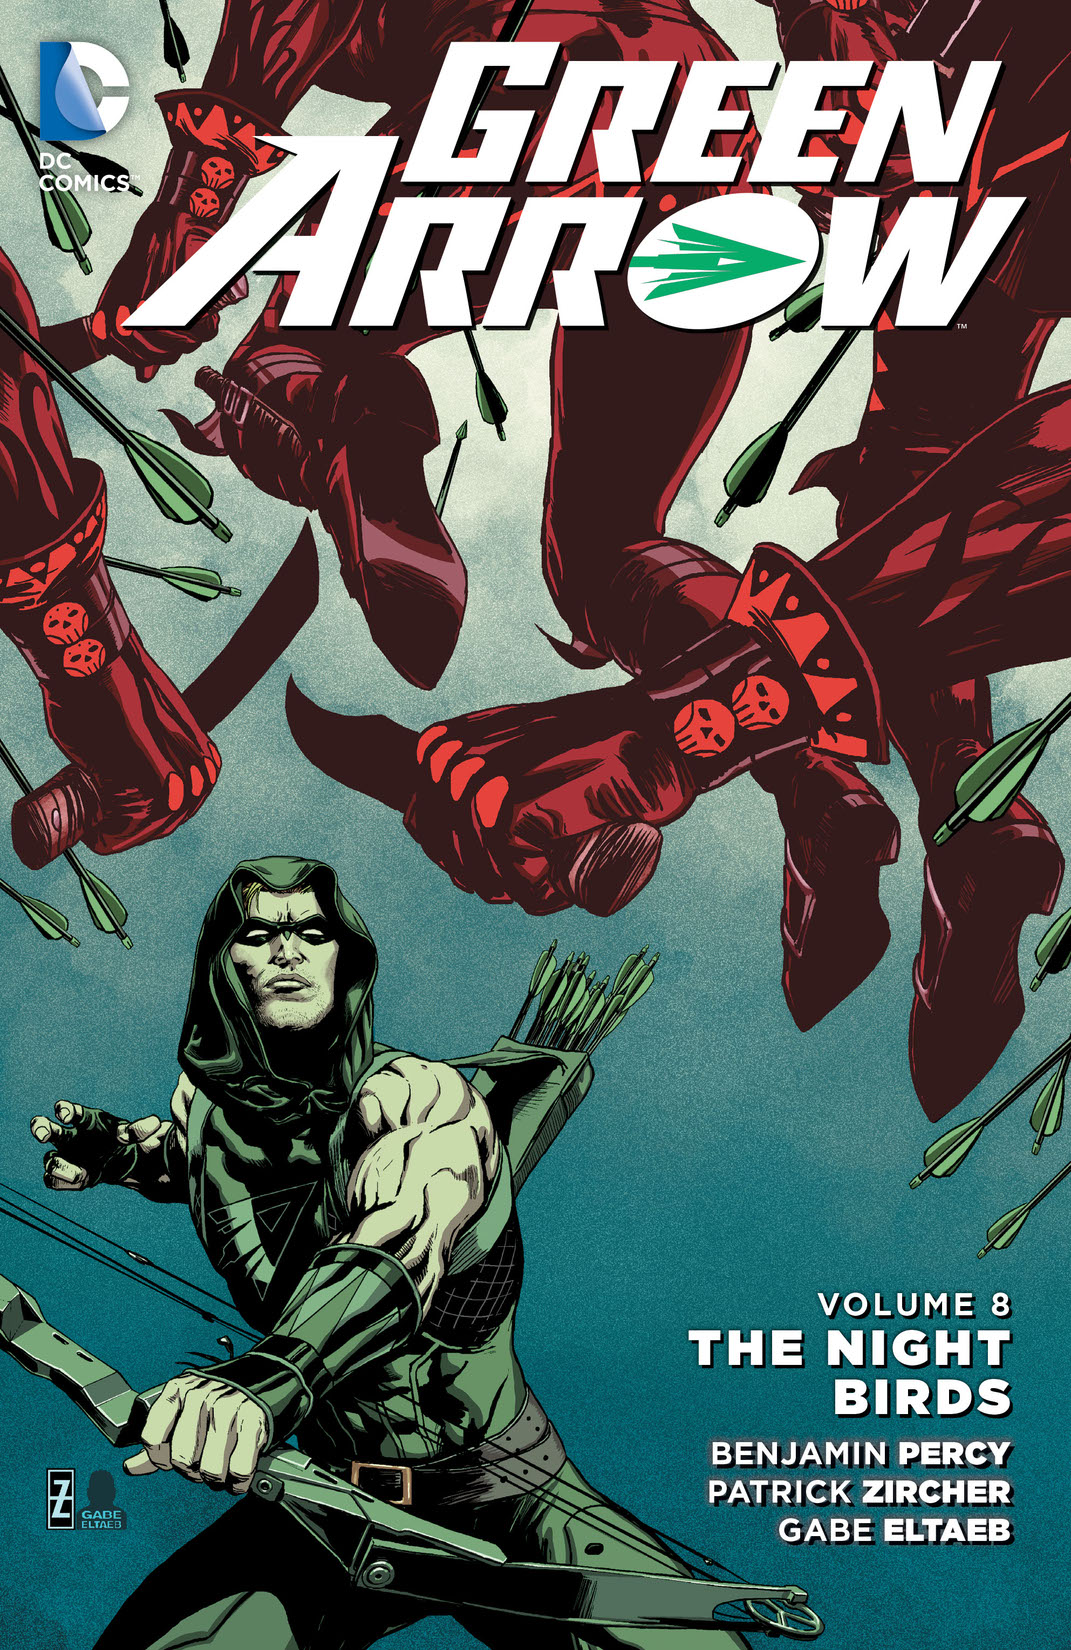 Green Arrow Vol. 8: The Nightbirds preview images